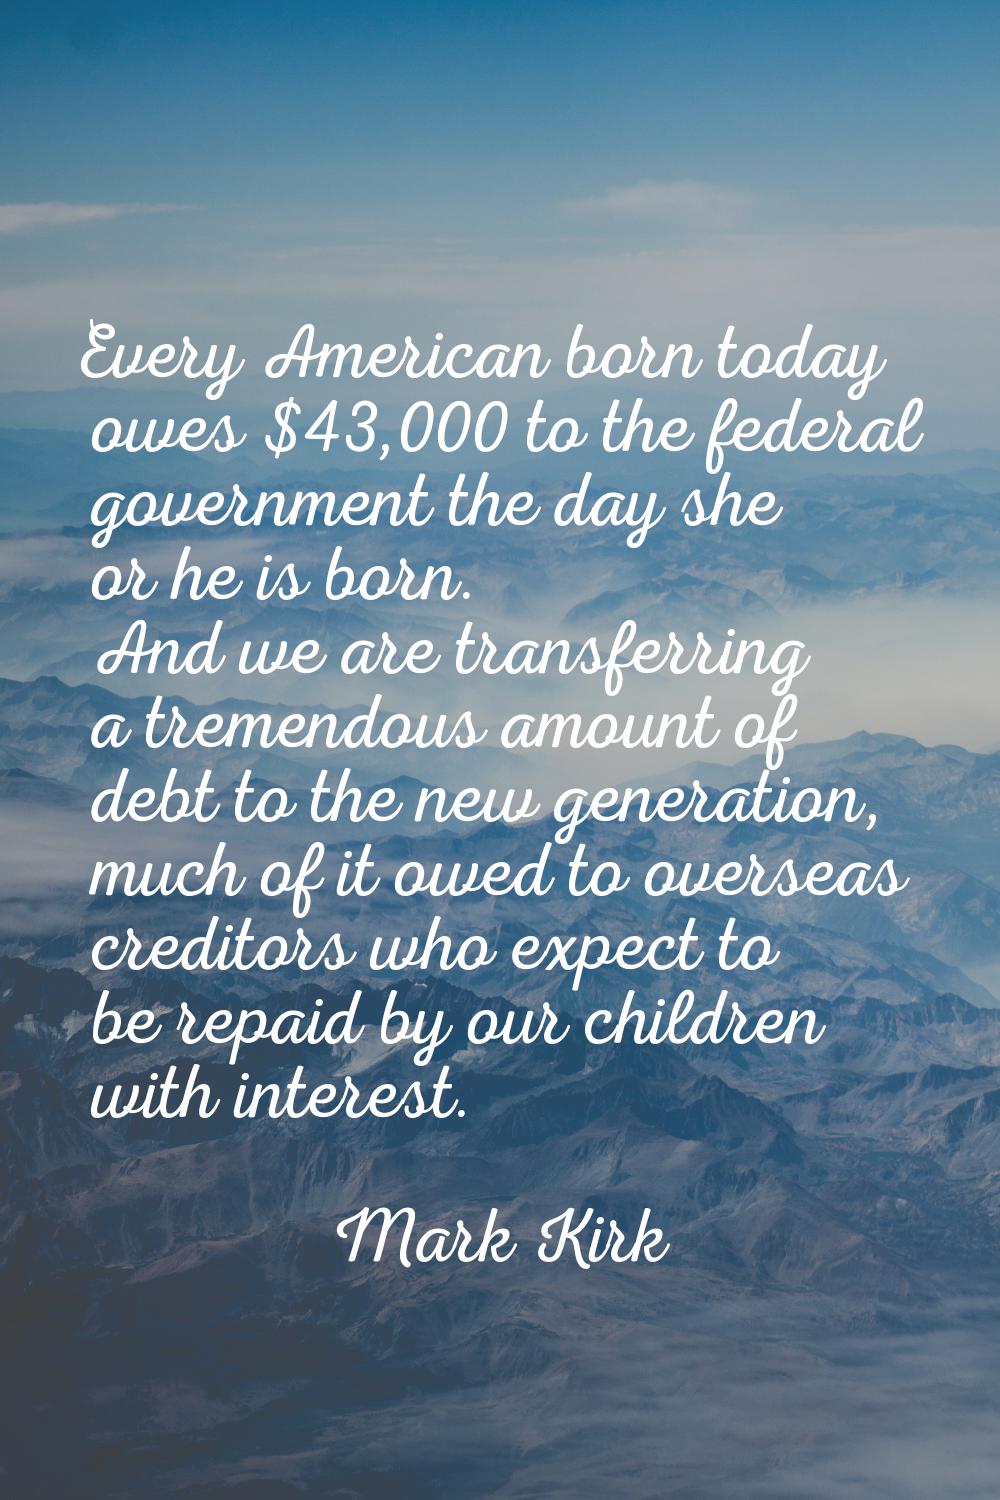 Every American born today owes $43,000 to the federal government the day she or he is born. And we 